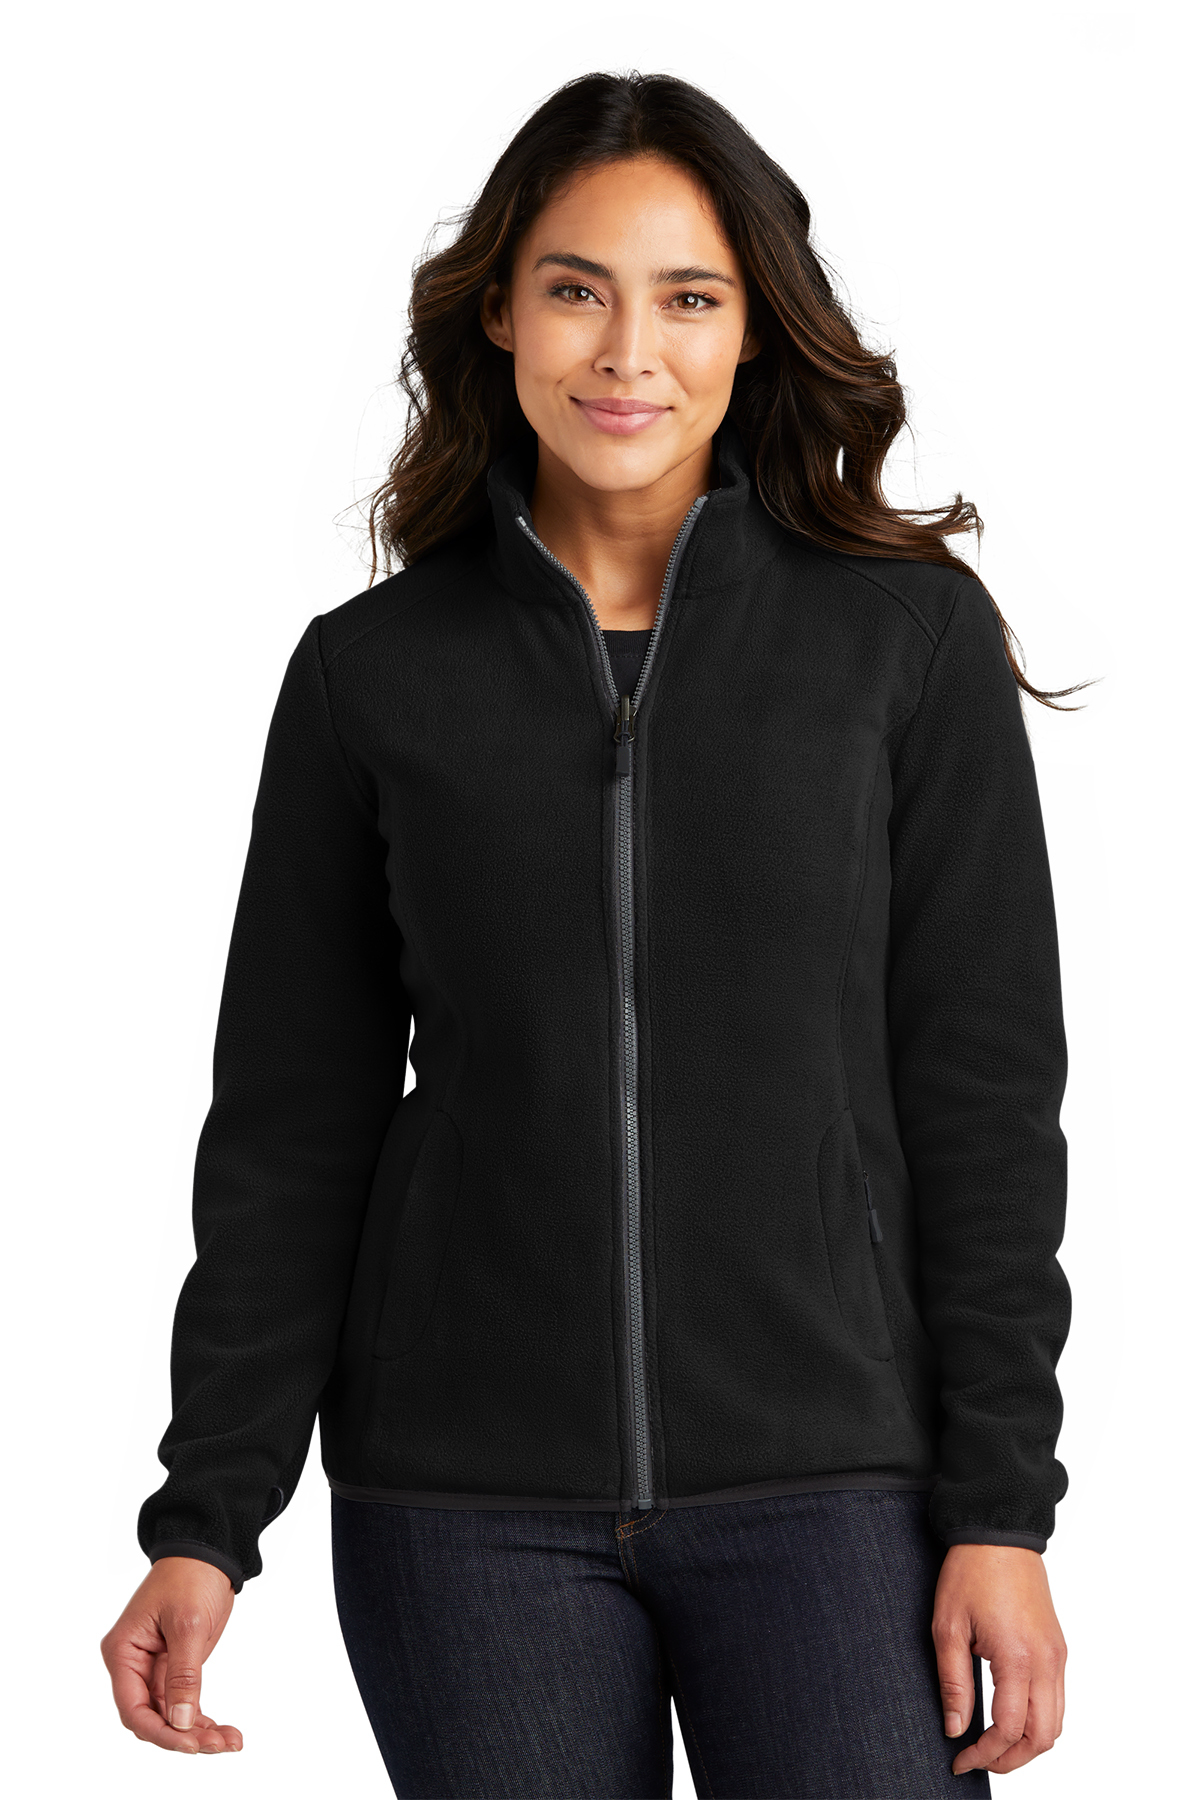 Port Authority Ladies All-Weather 3-in-1 Jacket | Product | Port Authority